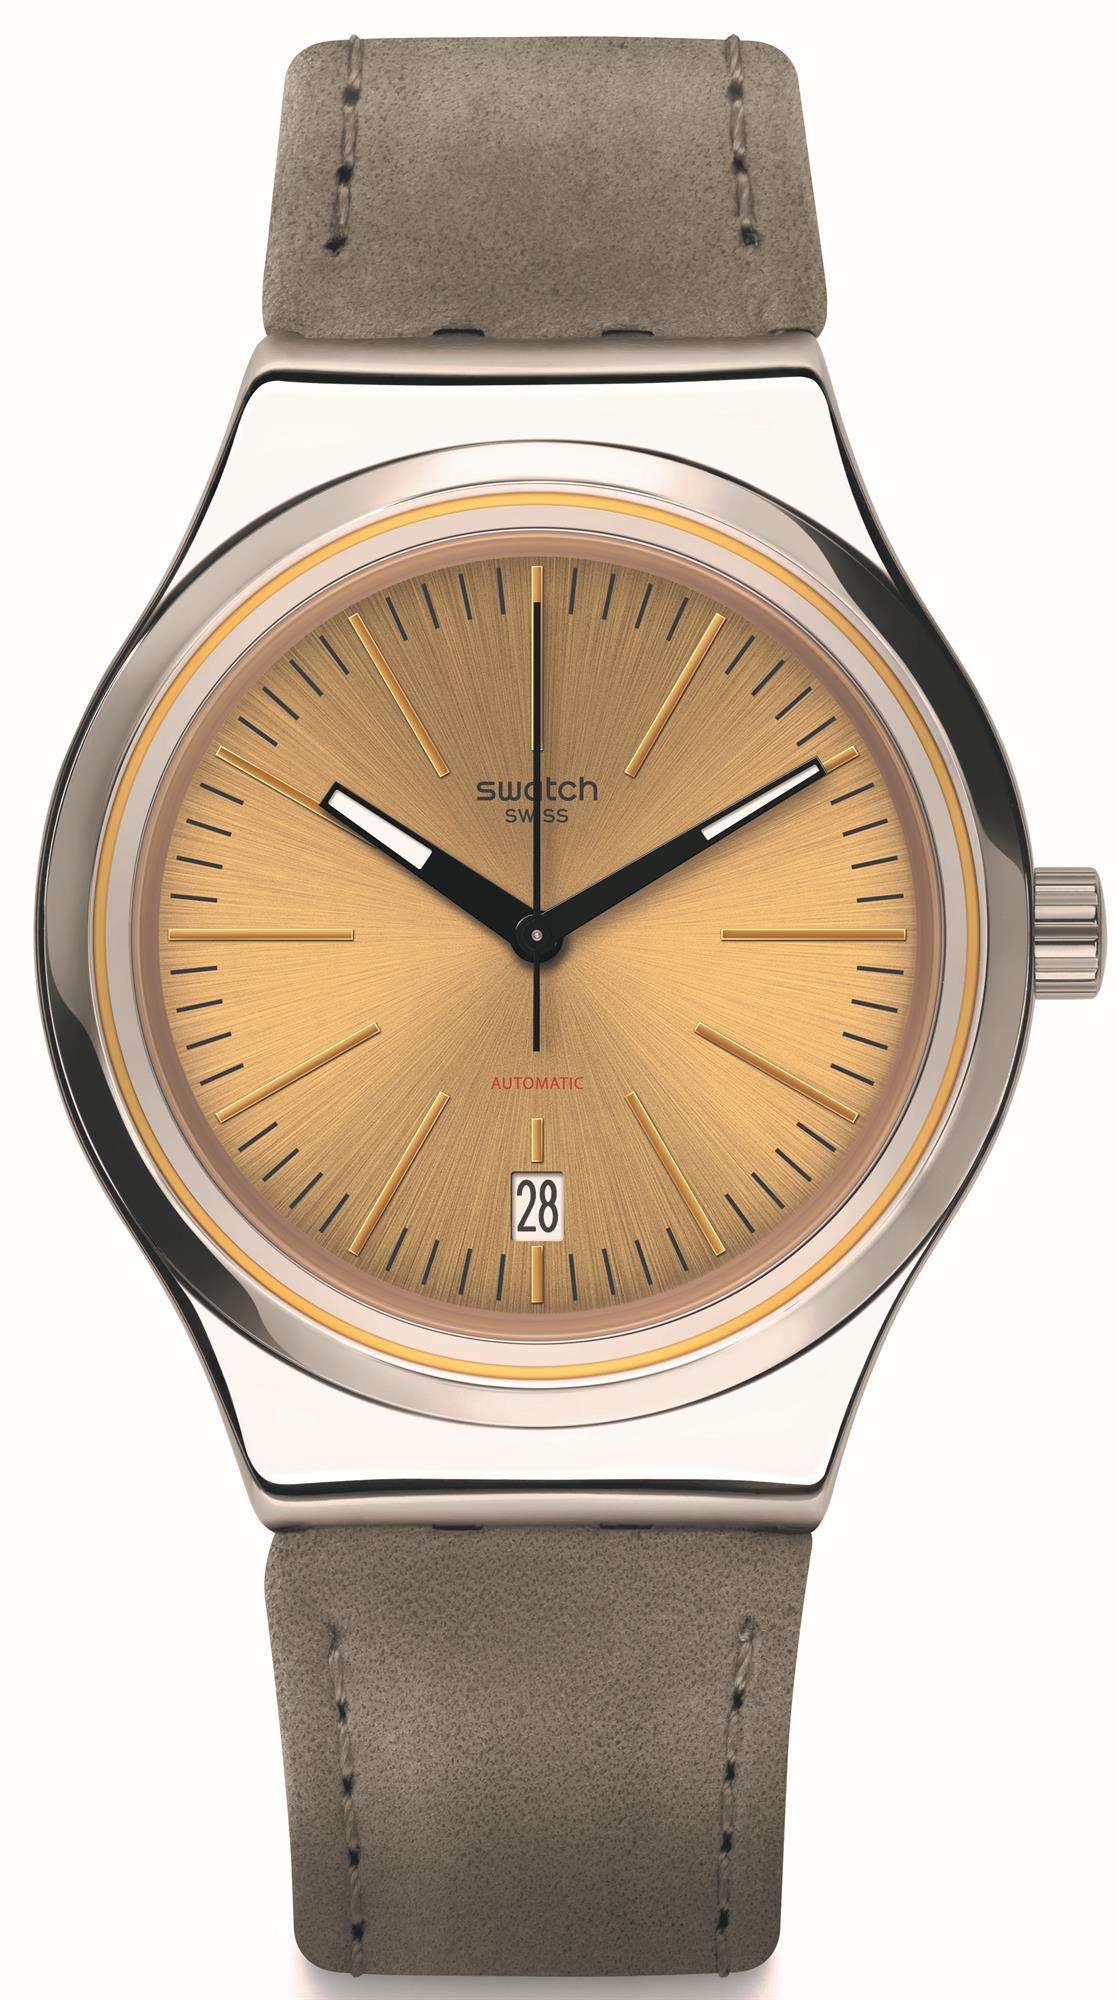 The Watch: Swatch Sistem Sand 42mm Case Automatic Ladies Fall Winter Watch YIS411This Swatch Sistem Sand Automatic Unisex Watch (YIS411) packs serious watchmaking substance into an elegantly understated design, as a cleanly styled sun-brushed gold-coloured dial and grey leather strap is teamed with an intricate automatic movement.Key Features:SISTEM51 Automatic MovementOpen Case BackDate WindowLeather StrapLuminous HandsWater Resistant to 30mThe Brand: SwatchSwatch watches are globally-renowned for their trademark combination of quality Swiss watchmaking, pioneering use of plastic cases and straps, and eye-catching designs. There is a Swatch watch to suit every age, taste and lifestyle, with this variety and sense of difference ensuring that Swatch watches remain some of the most popular and sought after currently manufactured.Who We AreWatchNation is proud to be an authorized, established and respected supplier of Swatch watches. We stock a broad and exciting range of these superb timepieces both online and in store. Visiting us in store, located at 15-17 Charles Street, Hoole, Chester, CH2 3AZ, gives you the opportunity to take a first-hand look at our fantastic range of high-quality timepieces, with our friendly team of staff always on hand to use their decades of experience to offer helpful advice, useful information and expert guidance. If you can’t pay a visit to our store, then our online delivery service guarantees that your latest timepiece will go from checkout to your wrist in a fast and reliable manner. These services are all a product of the motto on which WatchNation was founded and will forever operate – “Time for the People.”